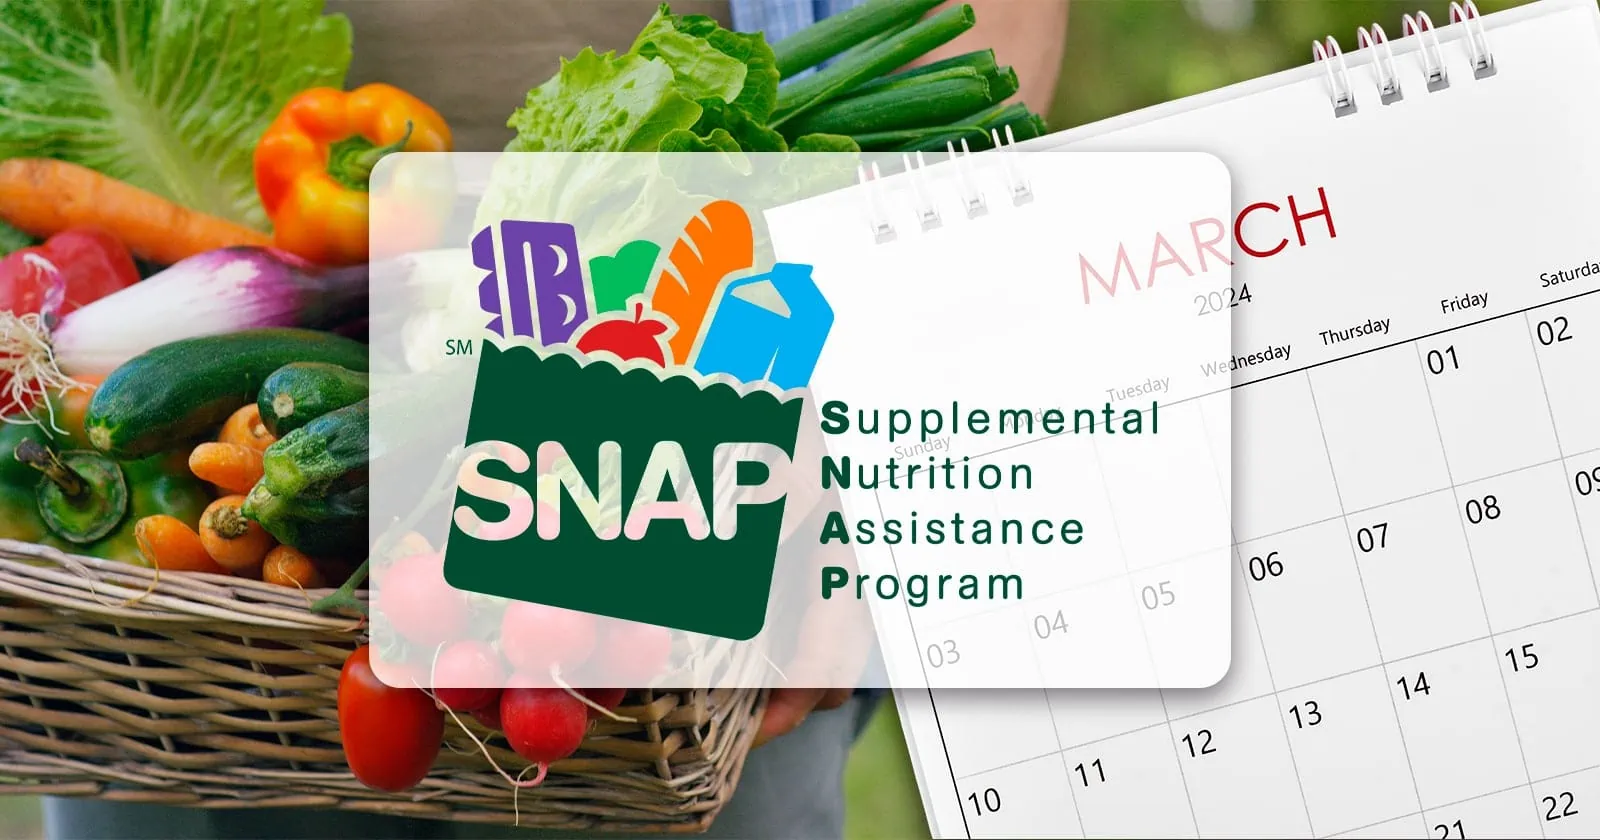 SNAP Benefits Recipients in the United States This is the Payment Schedule for March